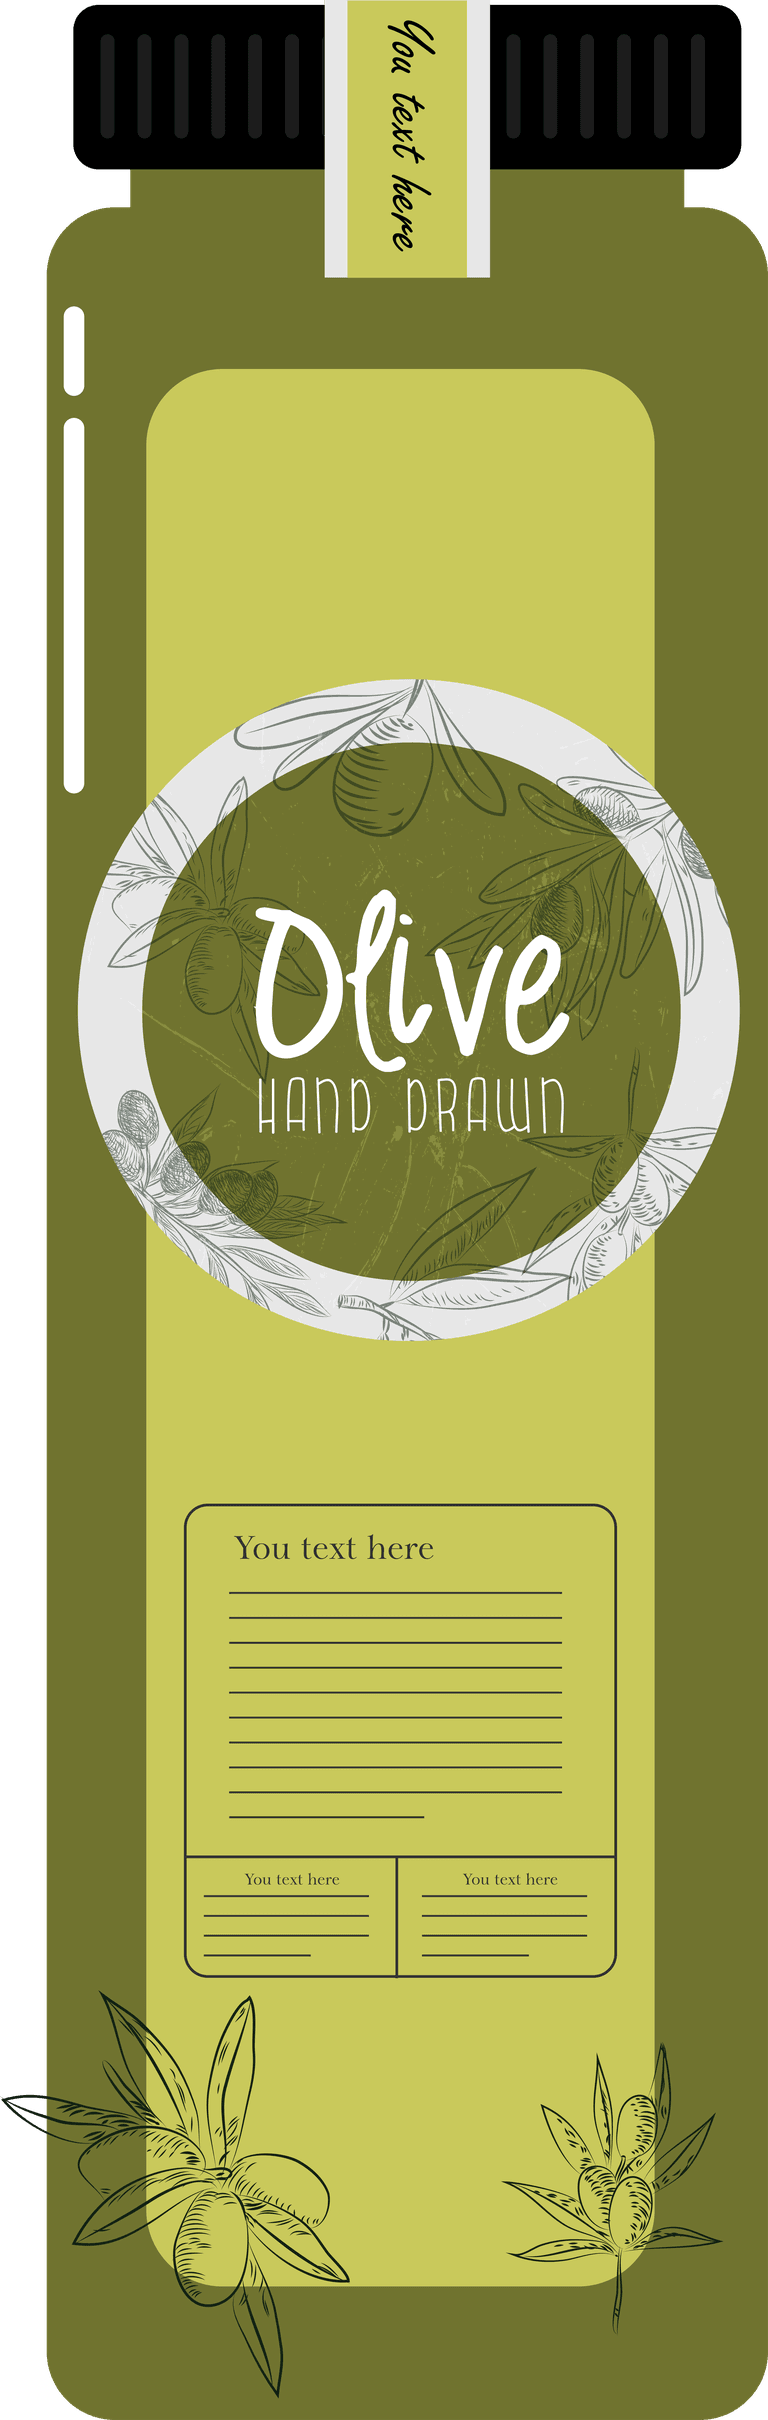 olive products advertising banner handdrawn flat decor